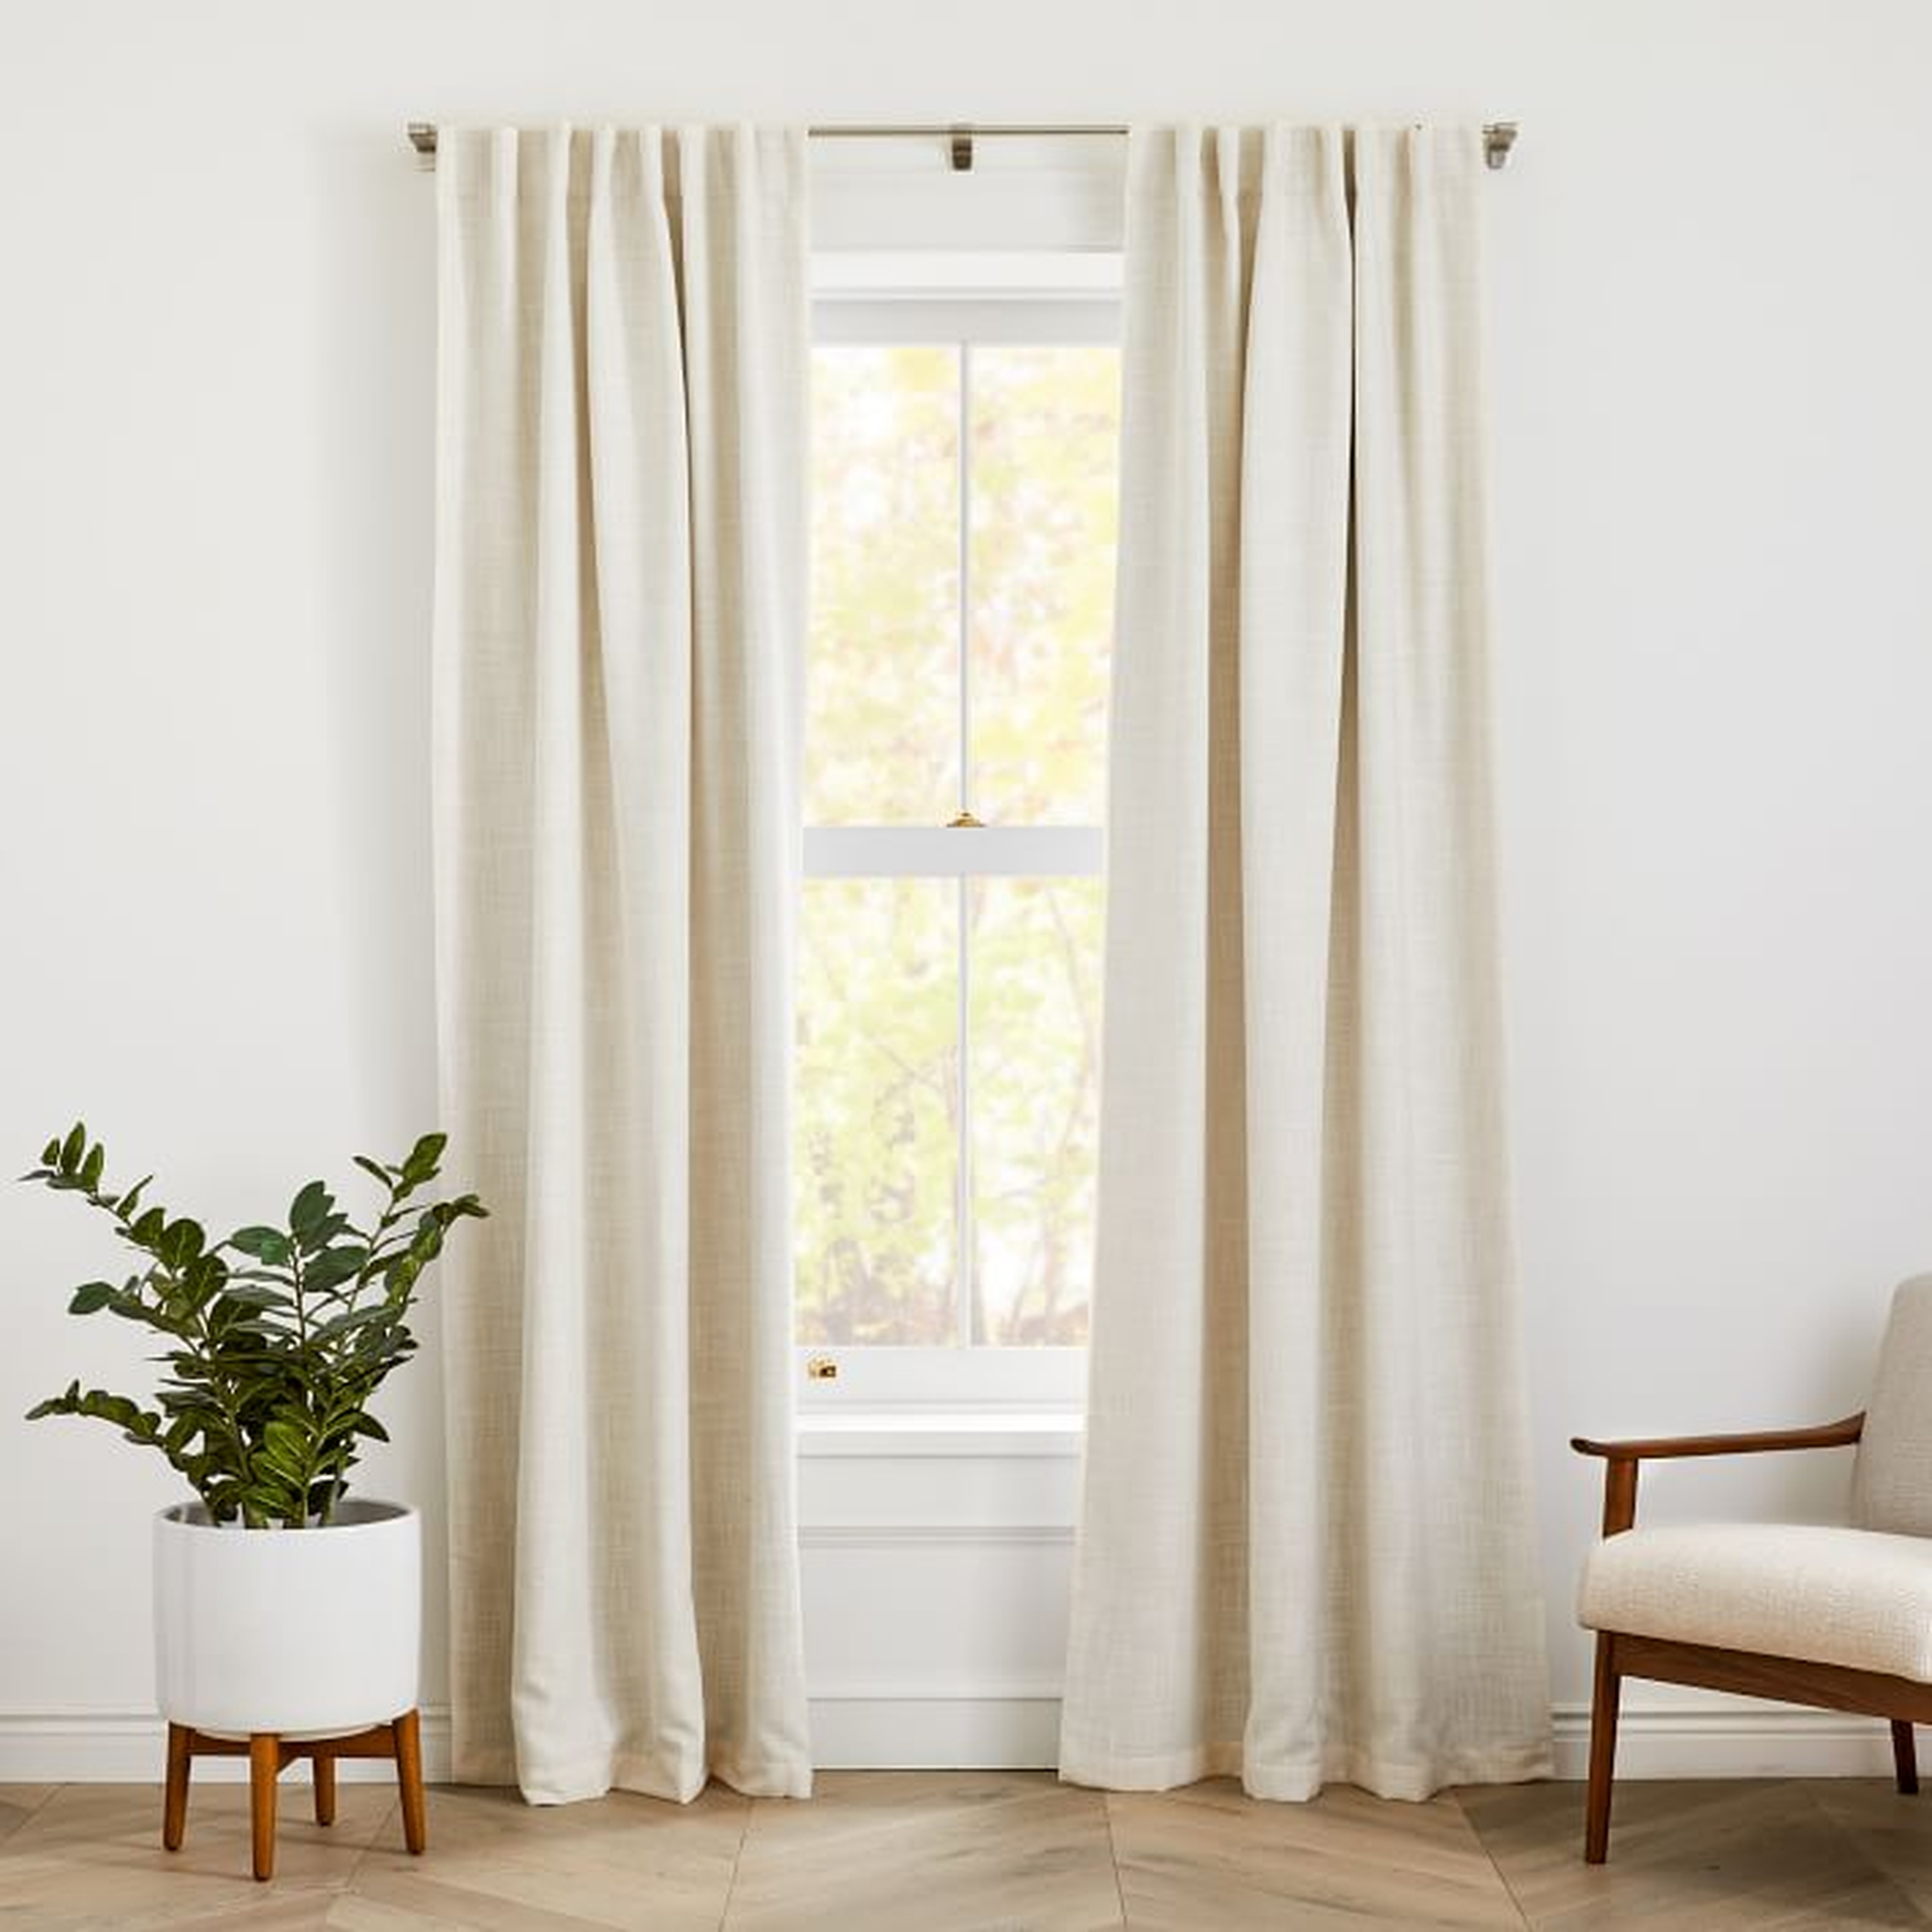 Crossweave Curtain with Black Out Natural Canvas 48"x84" - West Elm